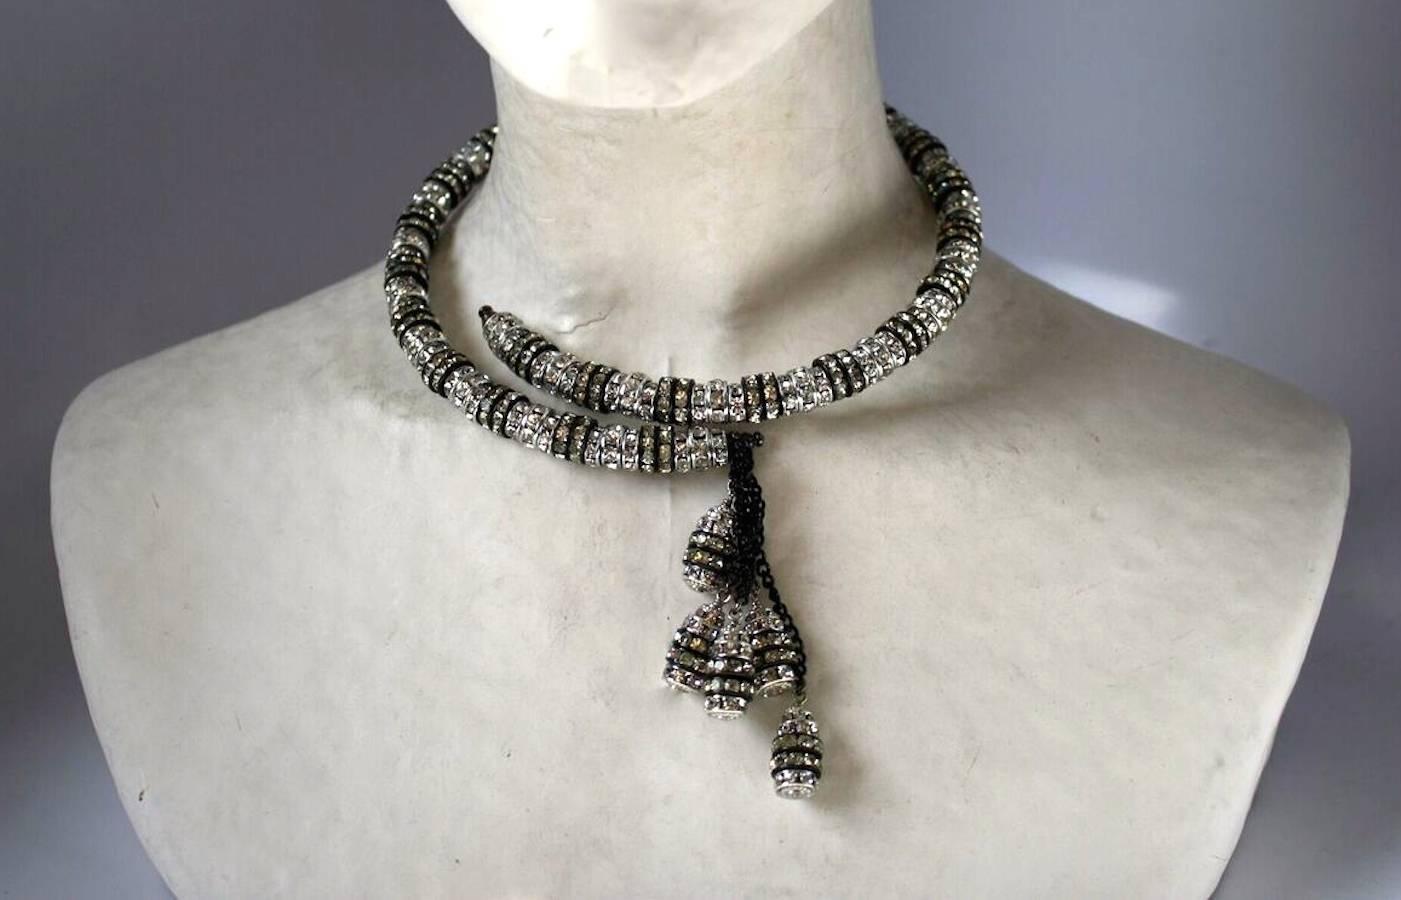 Swarovski Crystal rondelles set in rhodium are strung on molded wire, creating an easy to wear and elegant necklace from Francoise Montague.